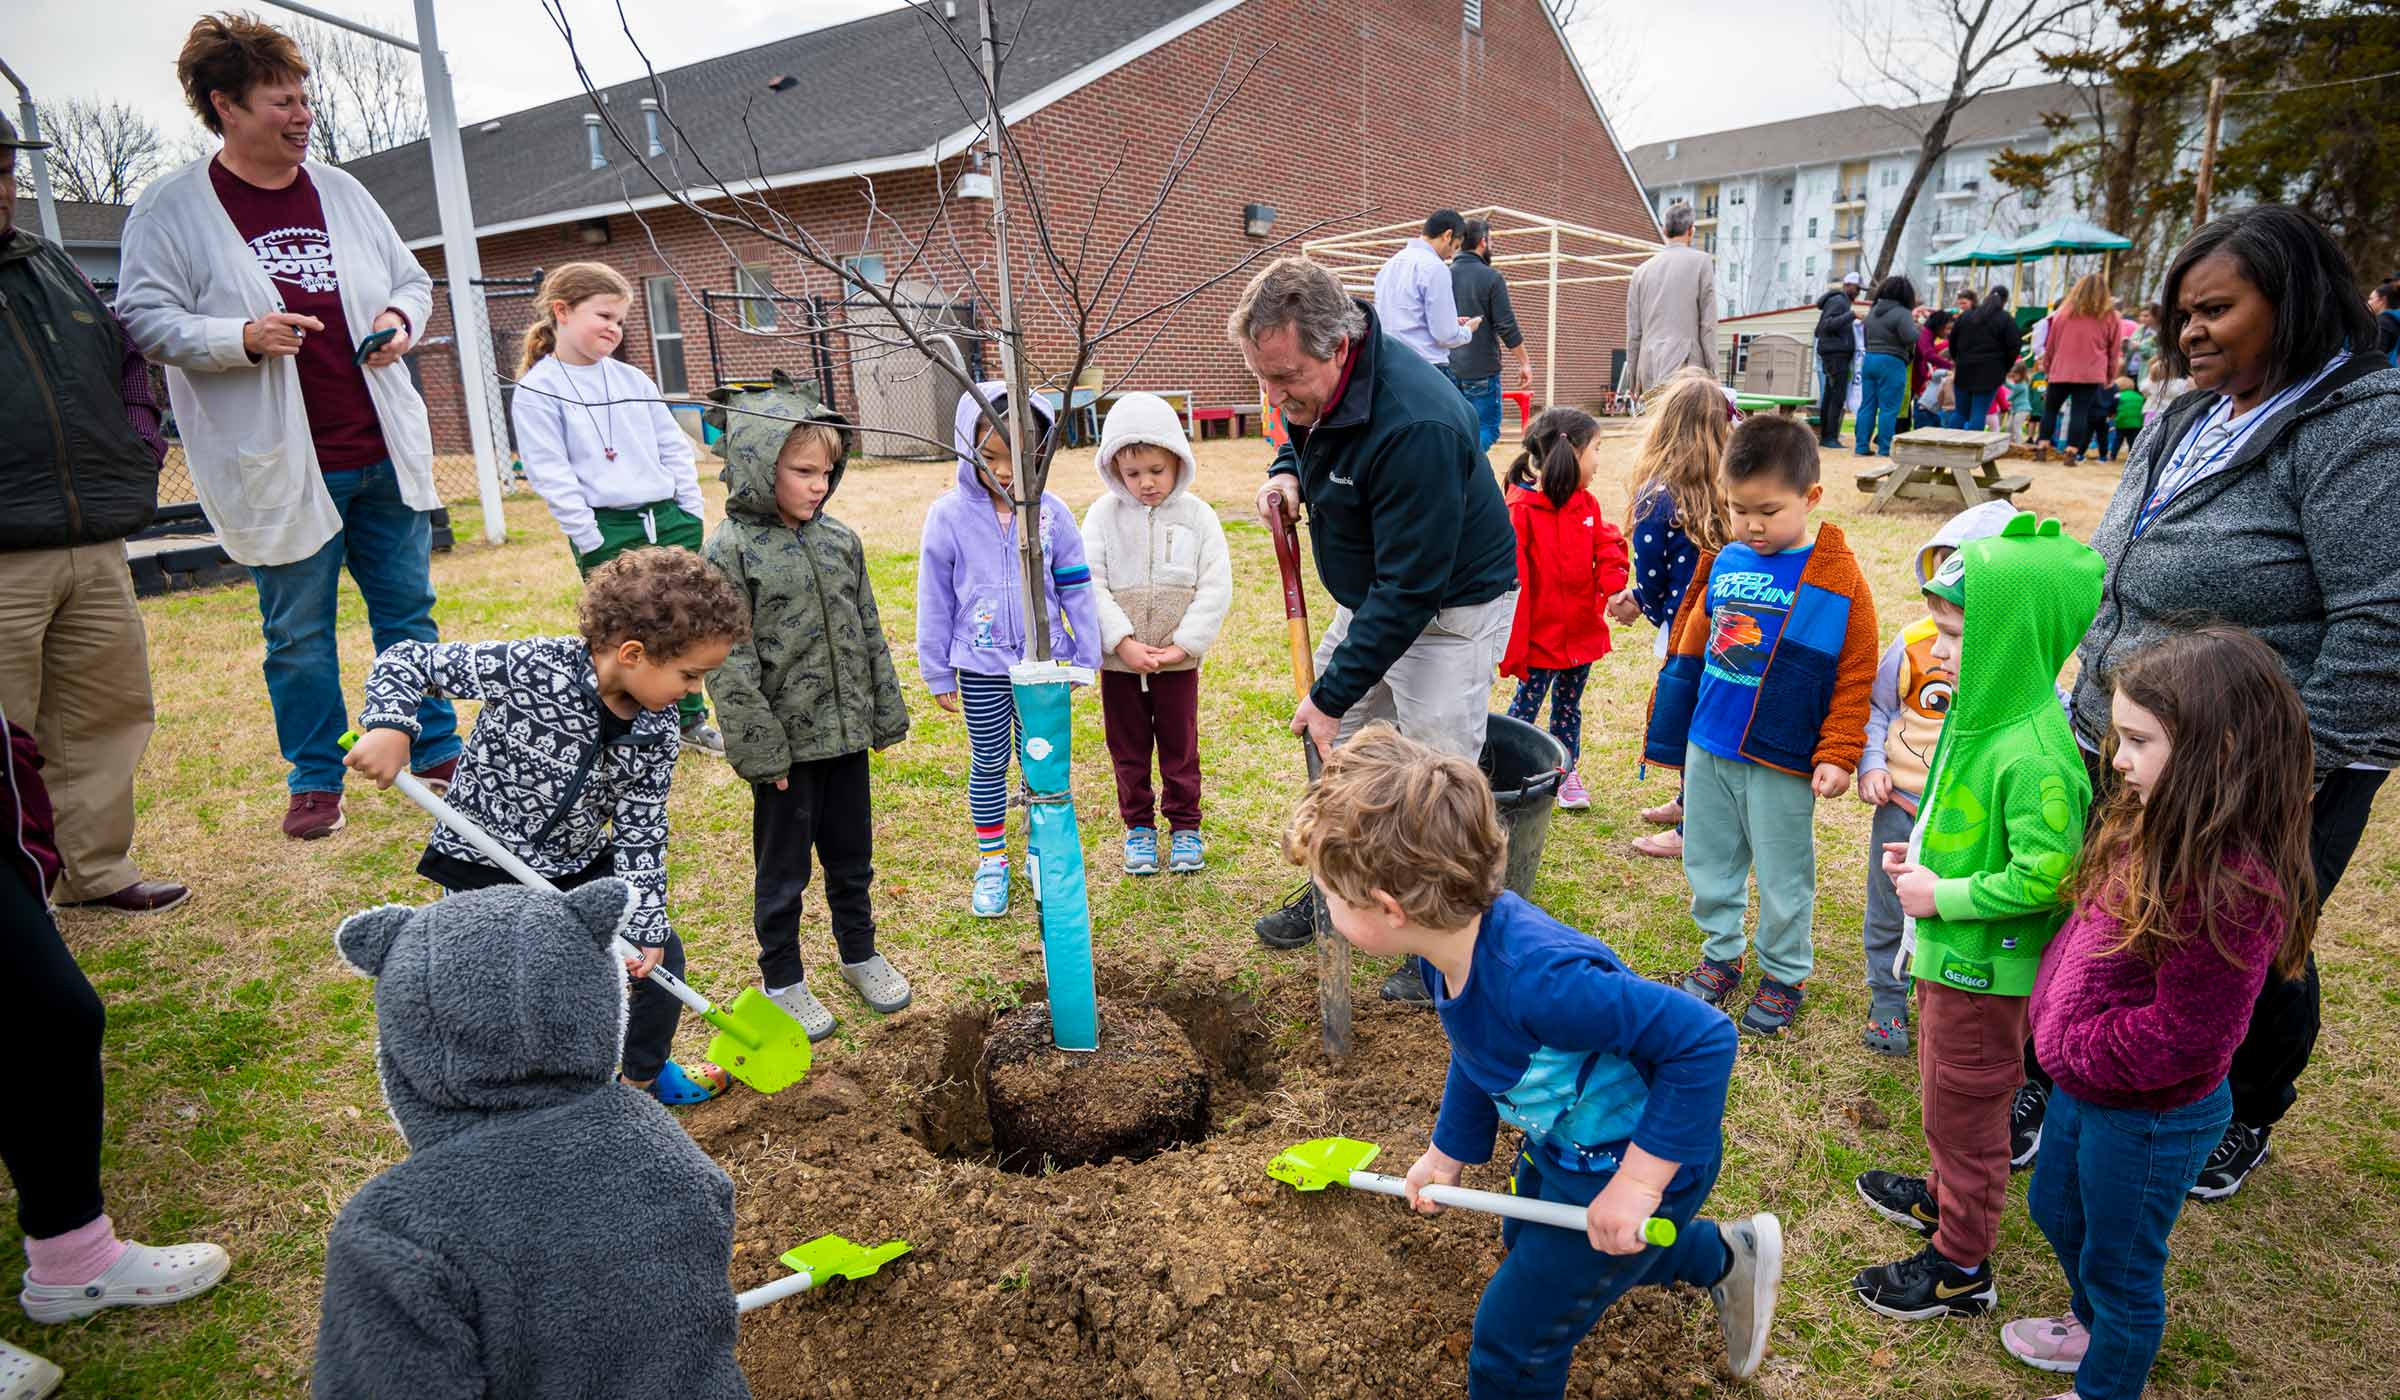 Kids helping to plant a tree with bright green shovels.